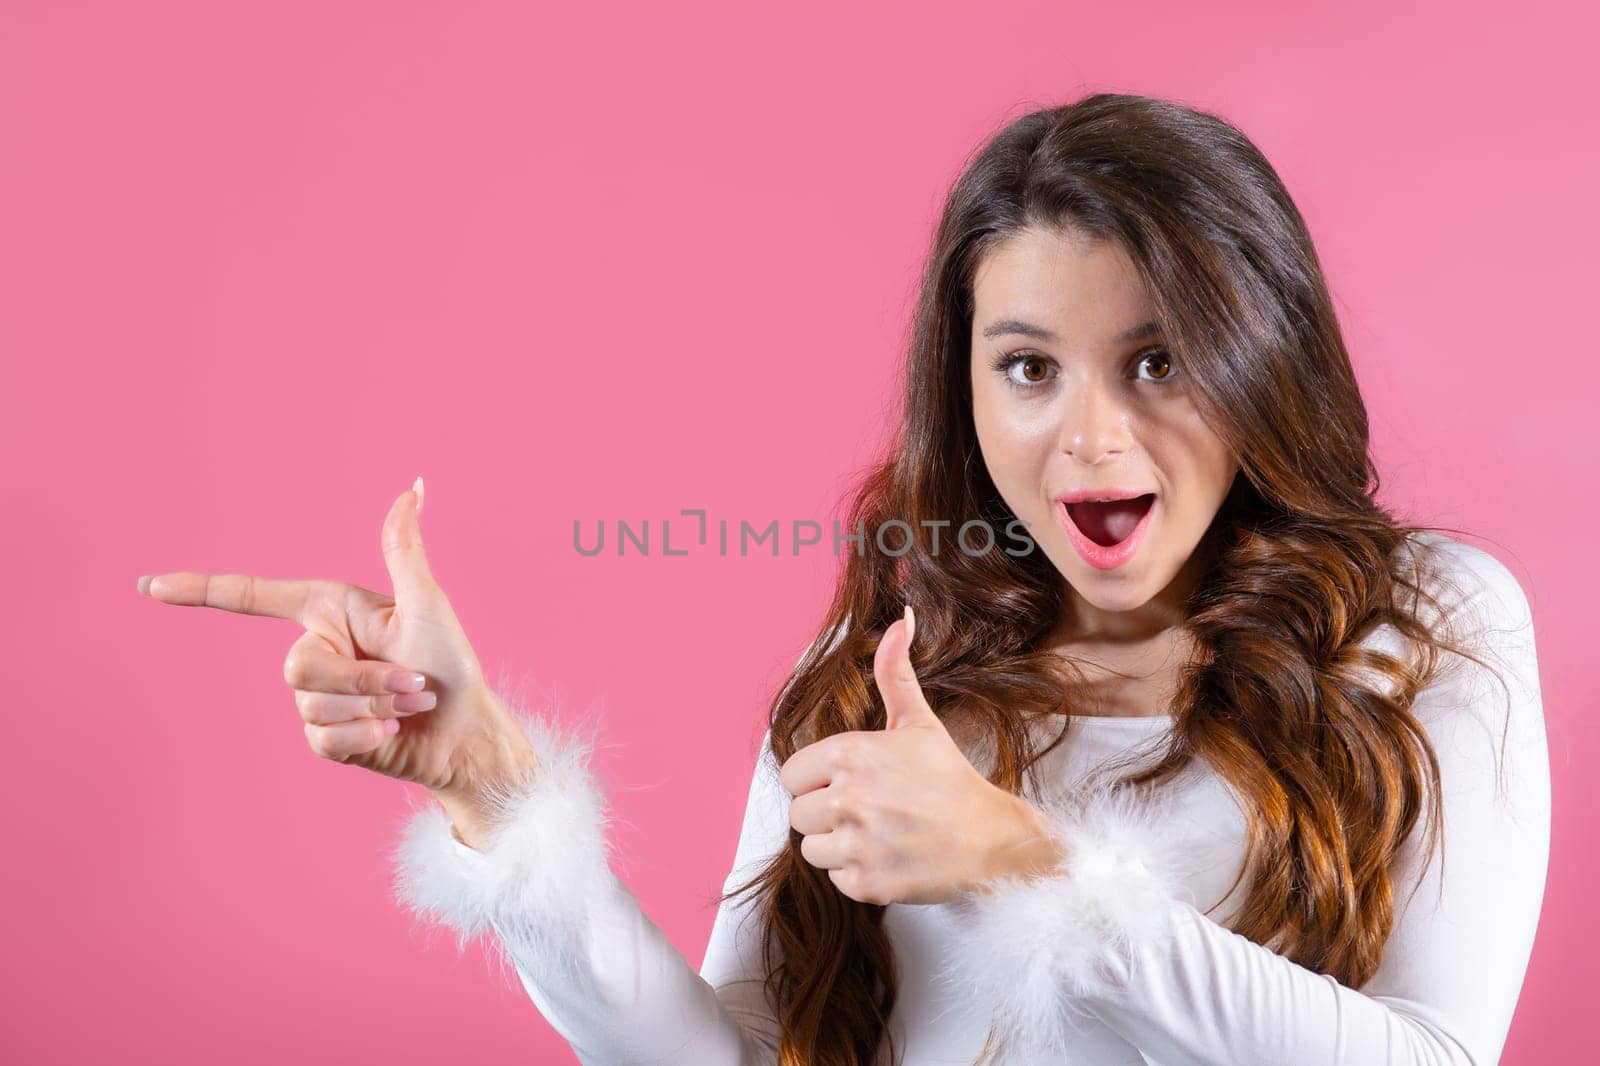 A portrait of a young lady looks at the camera and stands on a pink backdrop, gesturing towards copy space.